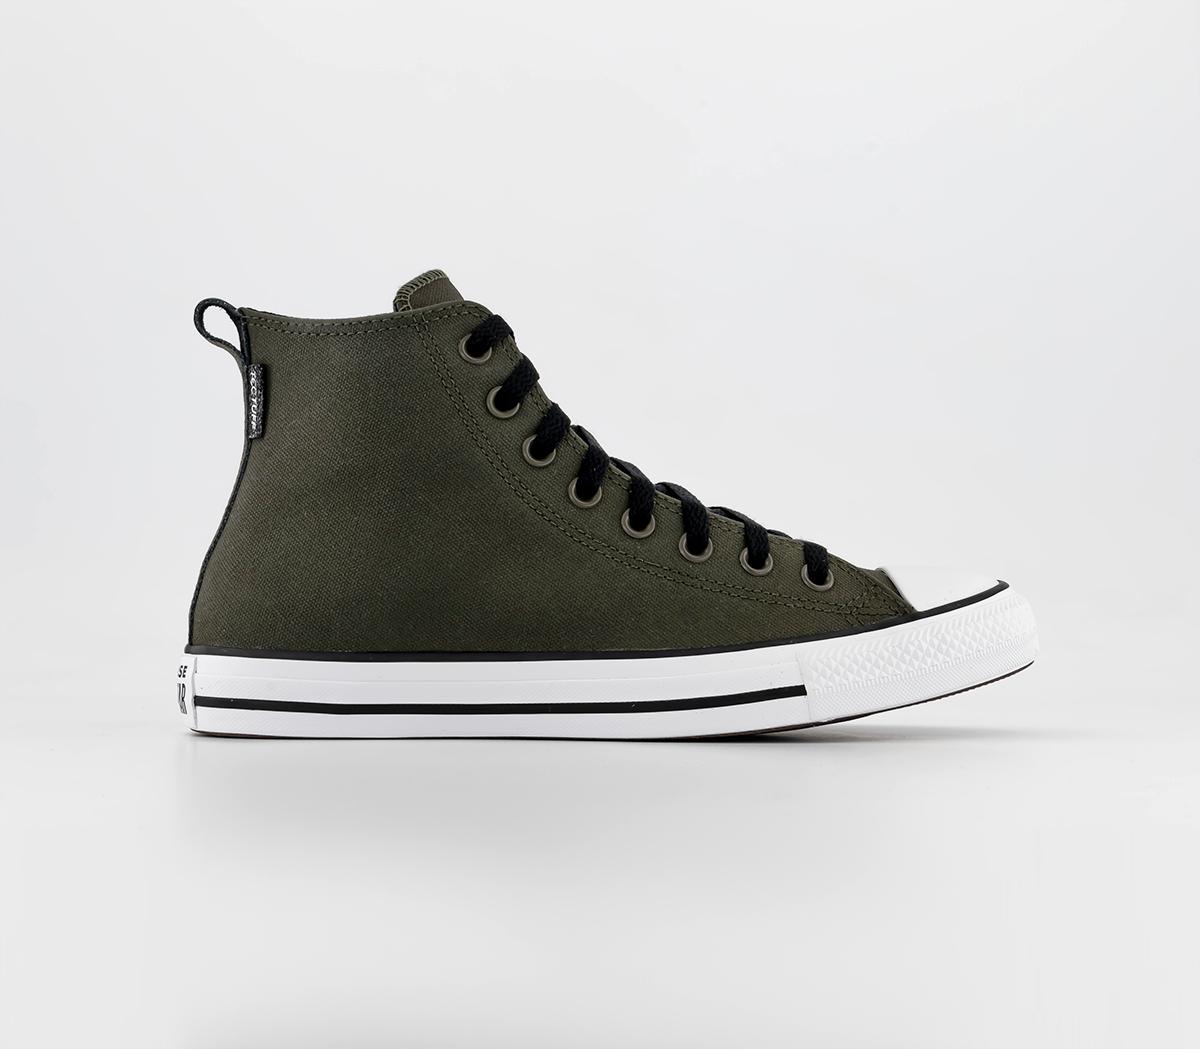 Converse Converse All Star Hi Trainers Utility Green White Black - Men's Trainers